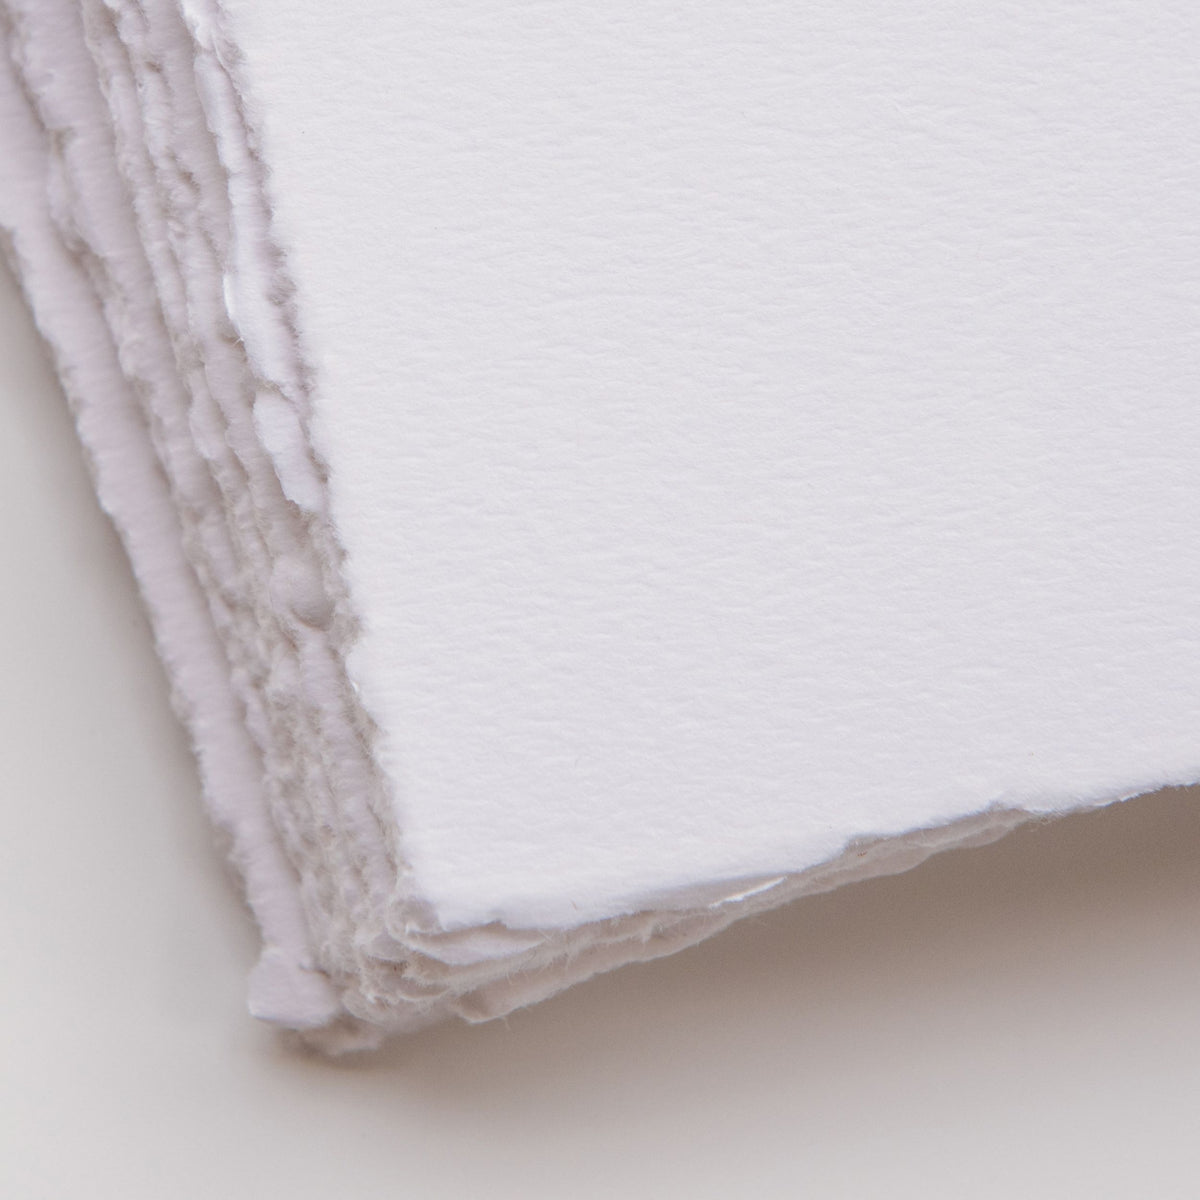 8x10 WHITE 150 Gsm Handmade Paper Deckled Edge Cotton Paper Deckle Edge  Paper White Cotton Paper Stationery Wedding Paper Calligraphy Paper 